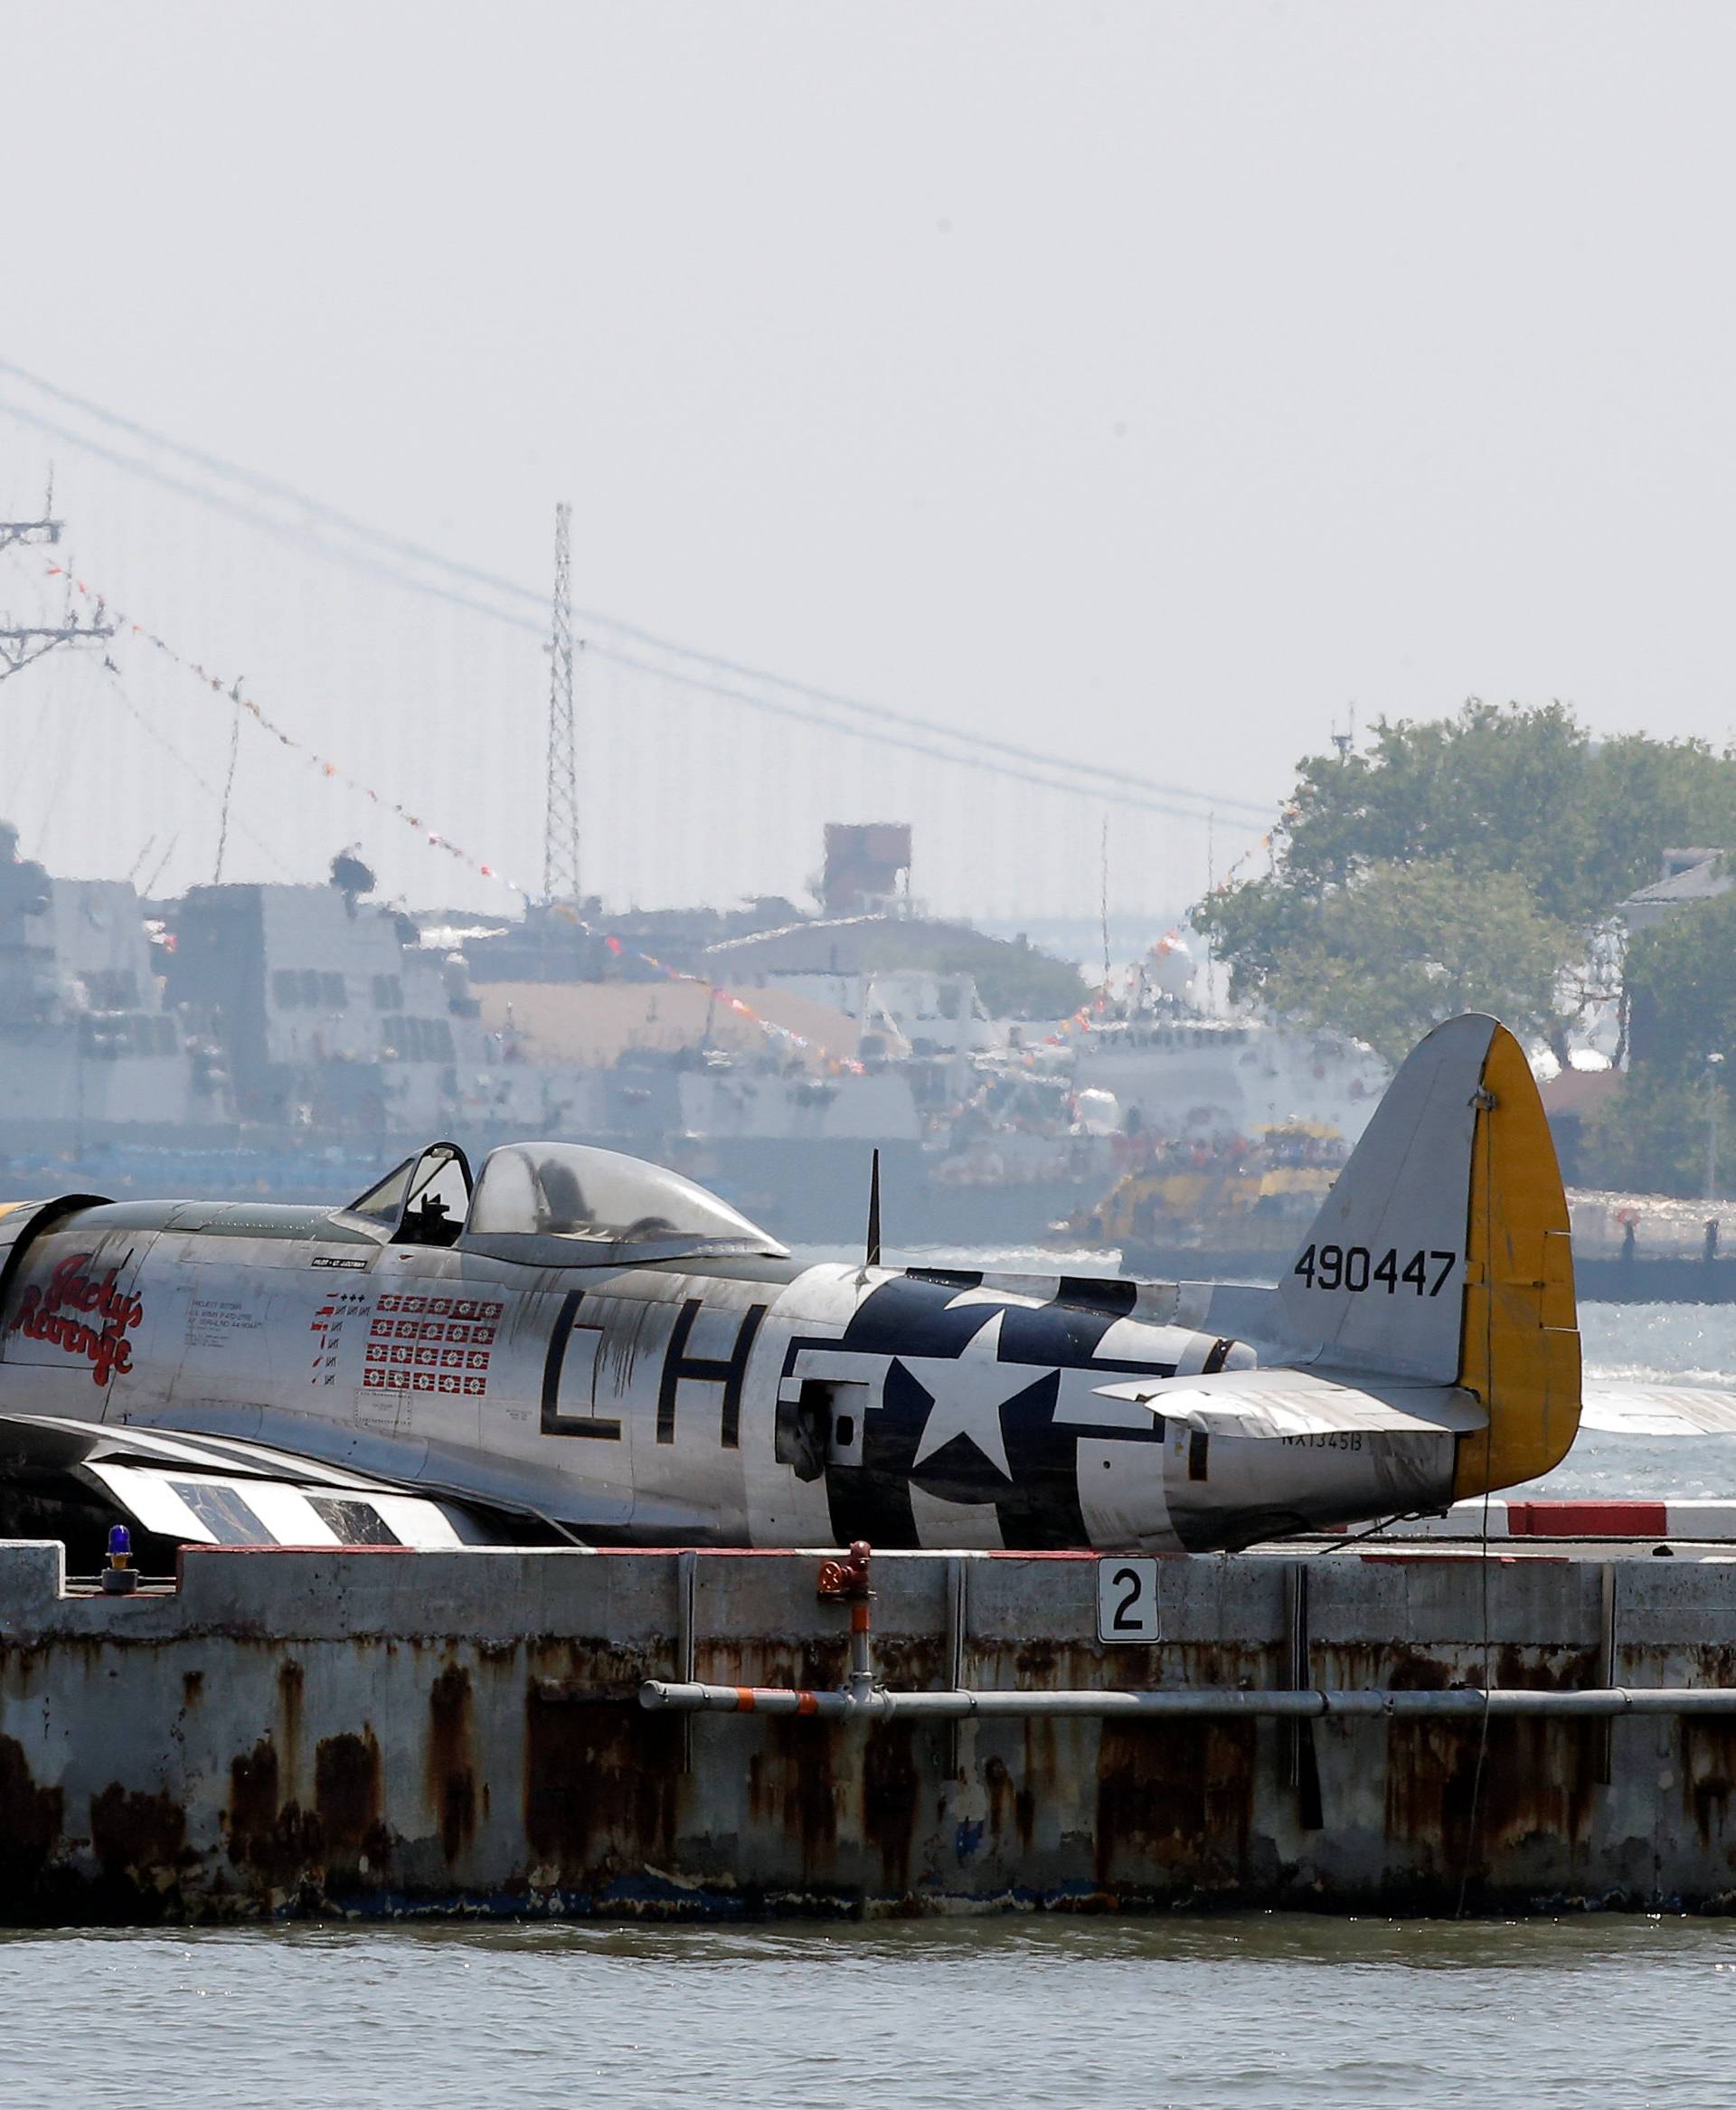 The wreckage of a vintage P-47 Thunderbolt airplane that crashed in the Hudson River sits on a barge in New York 